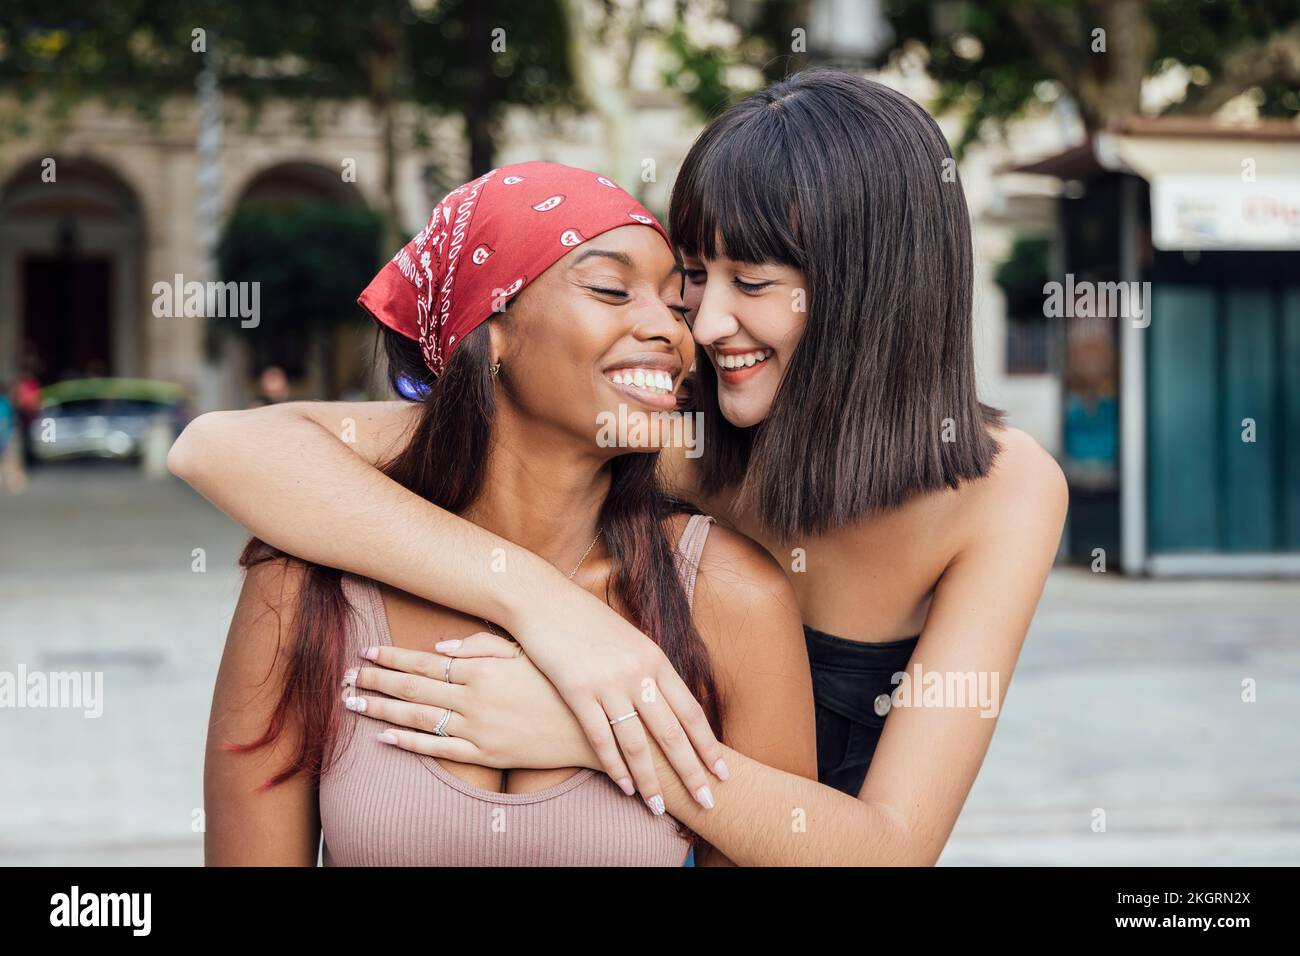 Smiling young woman embracing friend on footpath Stock Photo